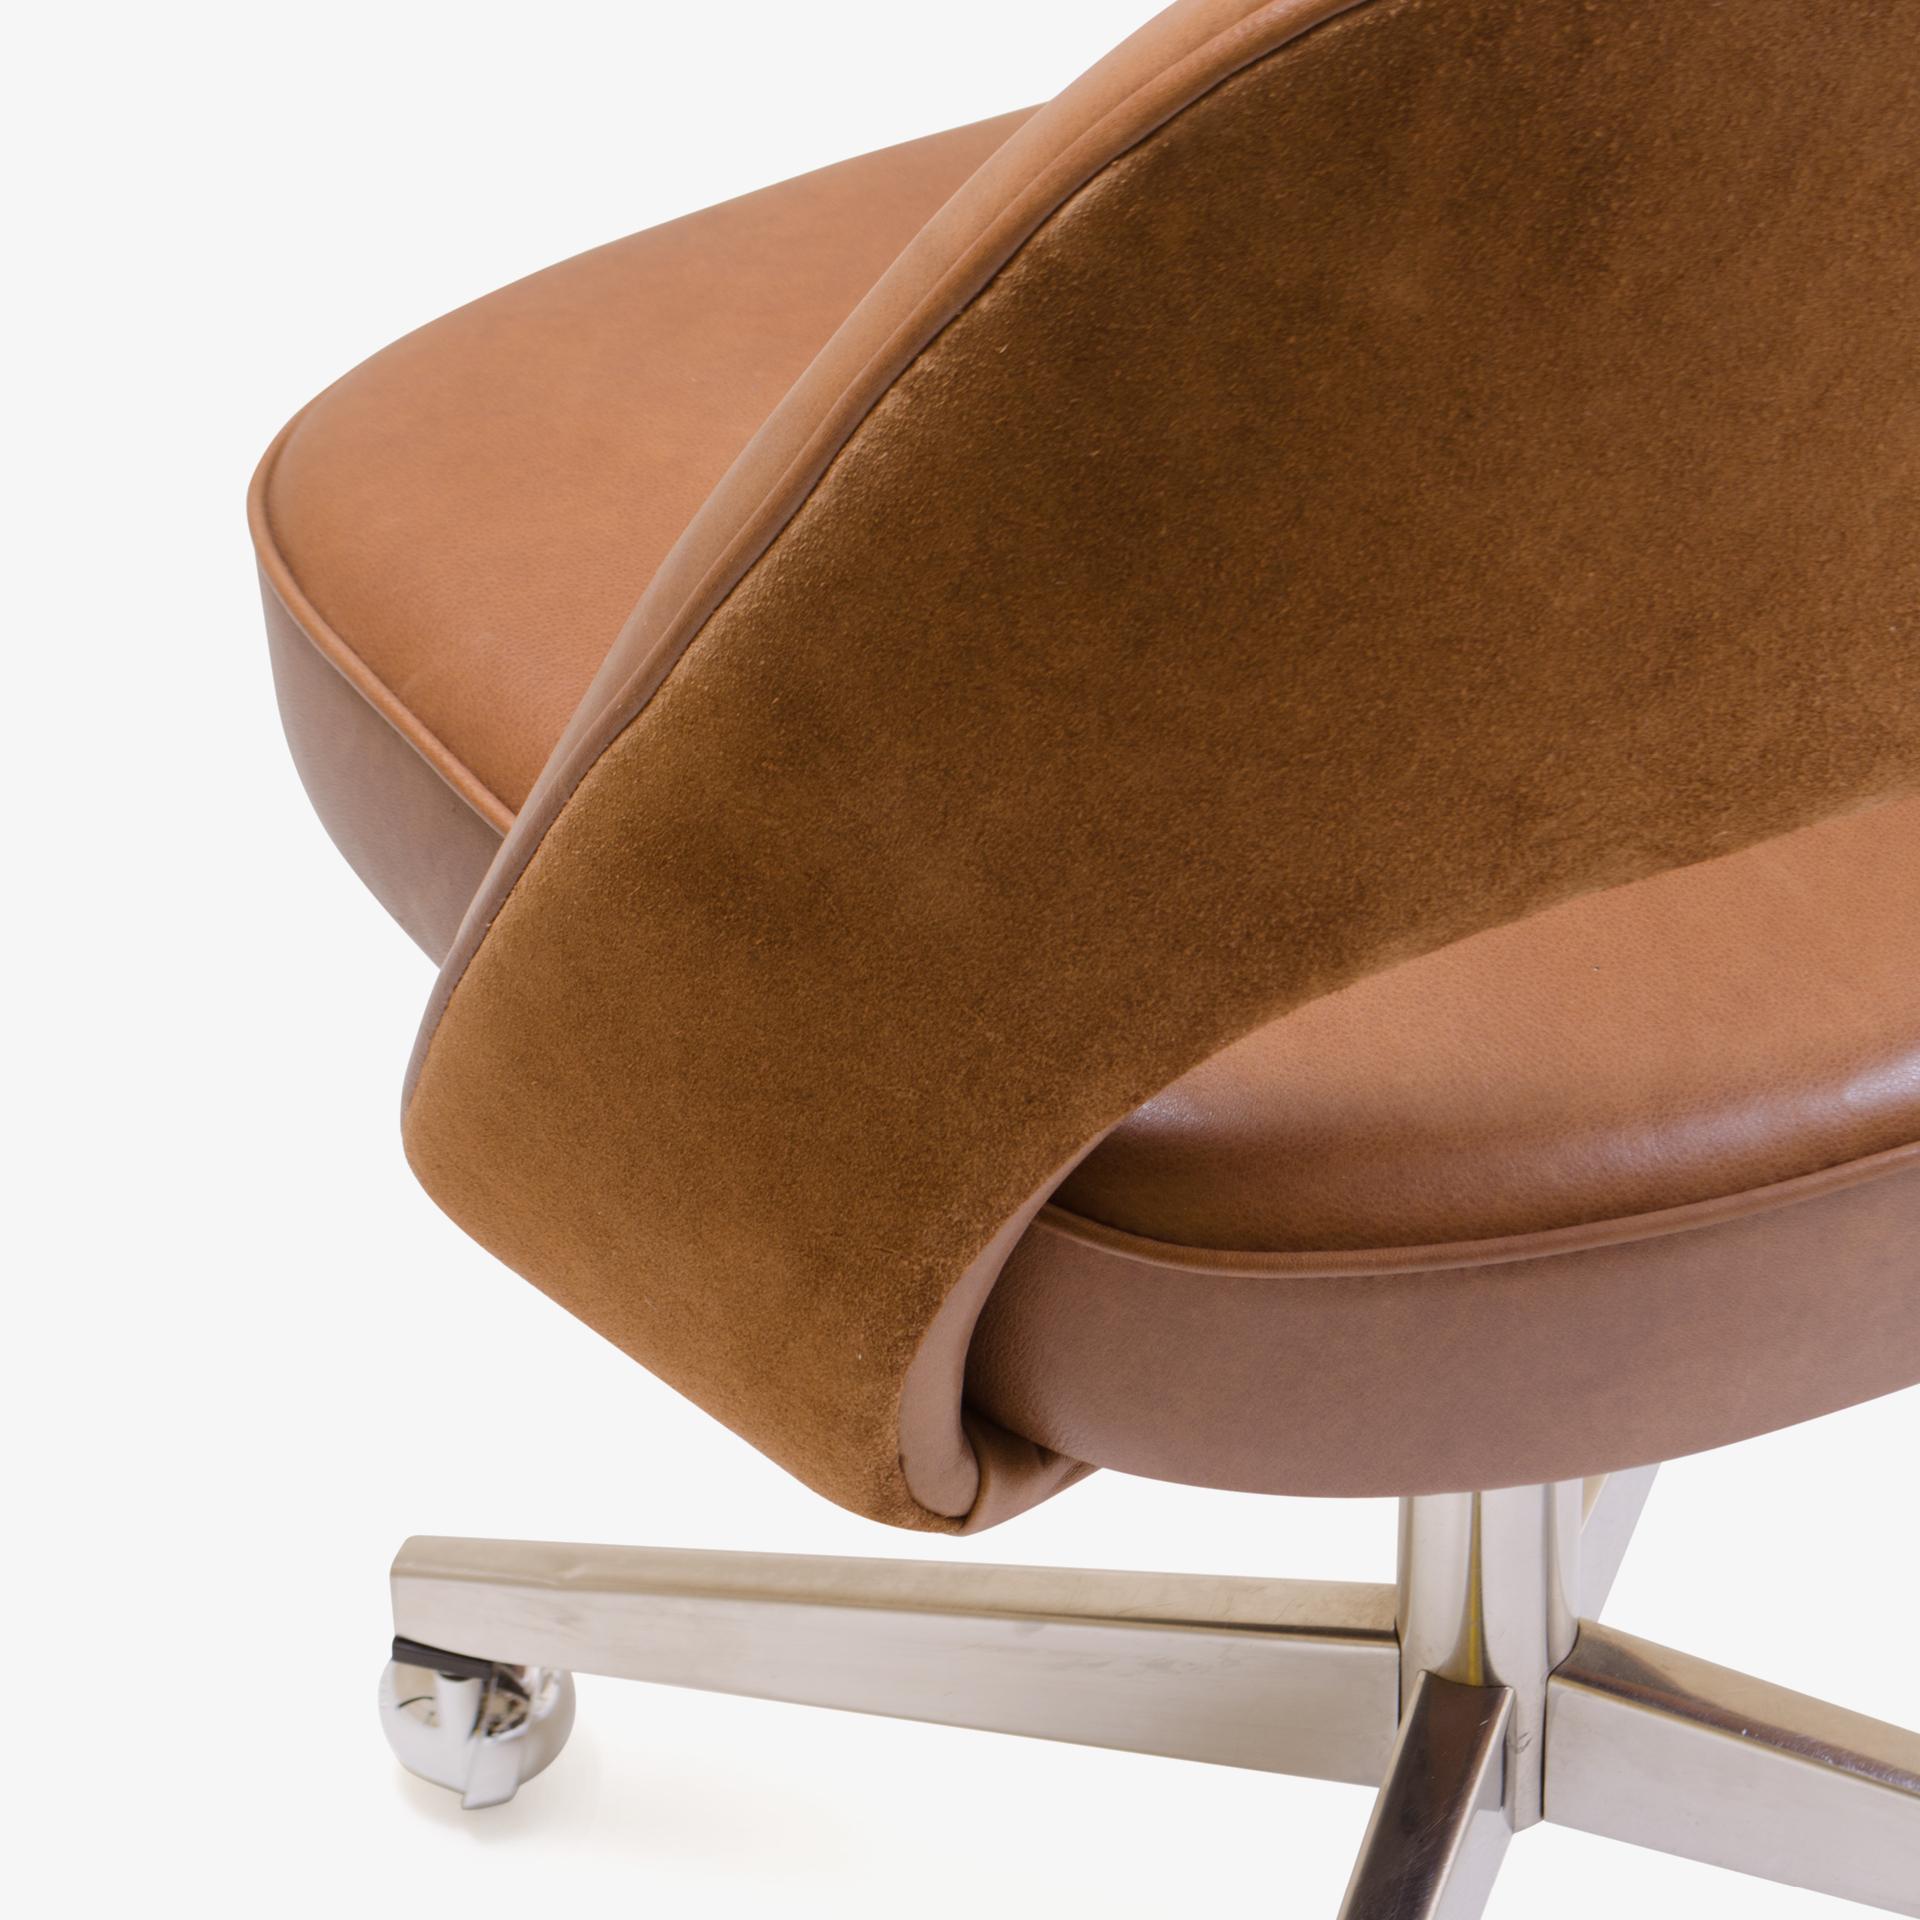 Saarinen Executive Armless Chair in Leather and Suede, Vintage Swivel Base In Good Condition For Sale In Wilton, CT